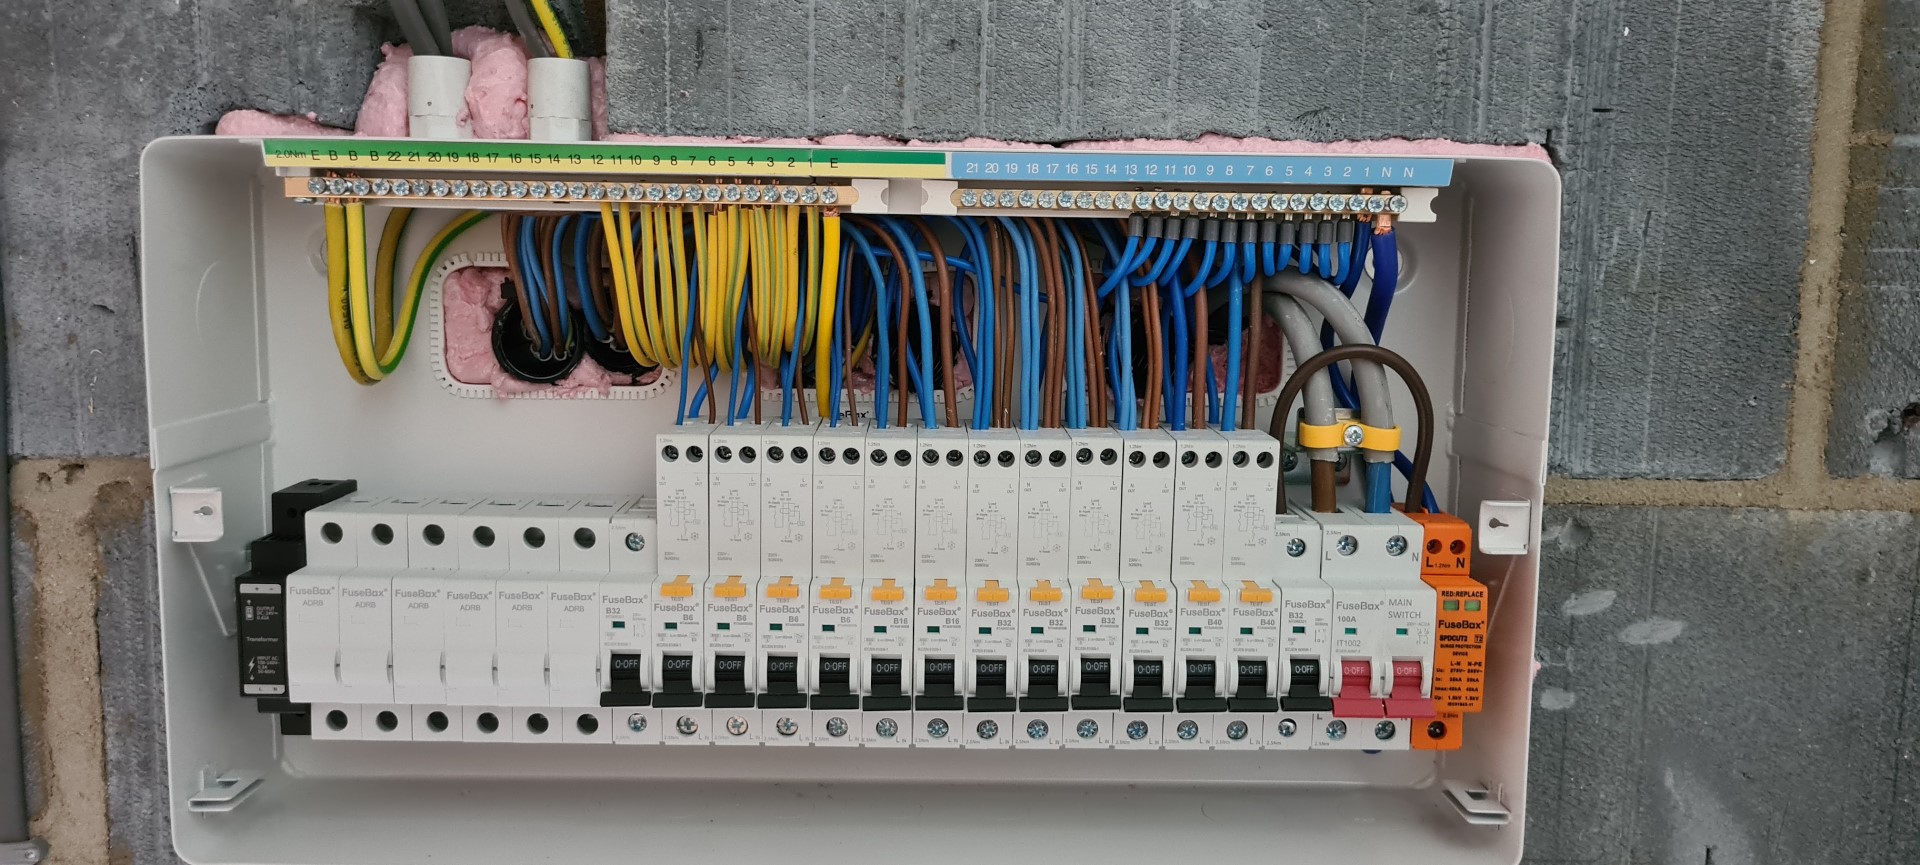 A detailed image of an open electrical distribution board installed by H Noble & Sons LTD, showcasing an array of neatly arranged cables in pink, yellow, and blue, connected to circuit breakers and an earth terminal block. The board is mounted on a concrete wall with visible insulation, reflecting the meticulous workmanship typical of H Noble & Sons LTD's electrical services